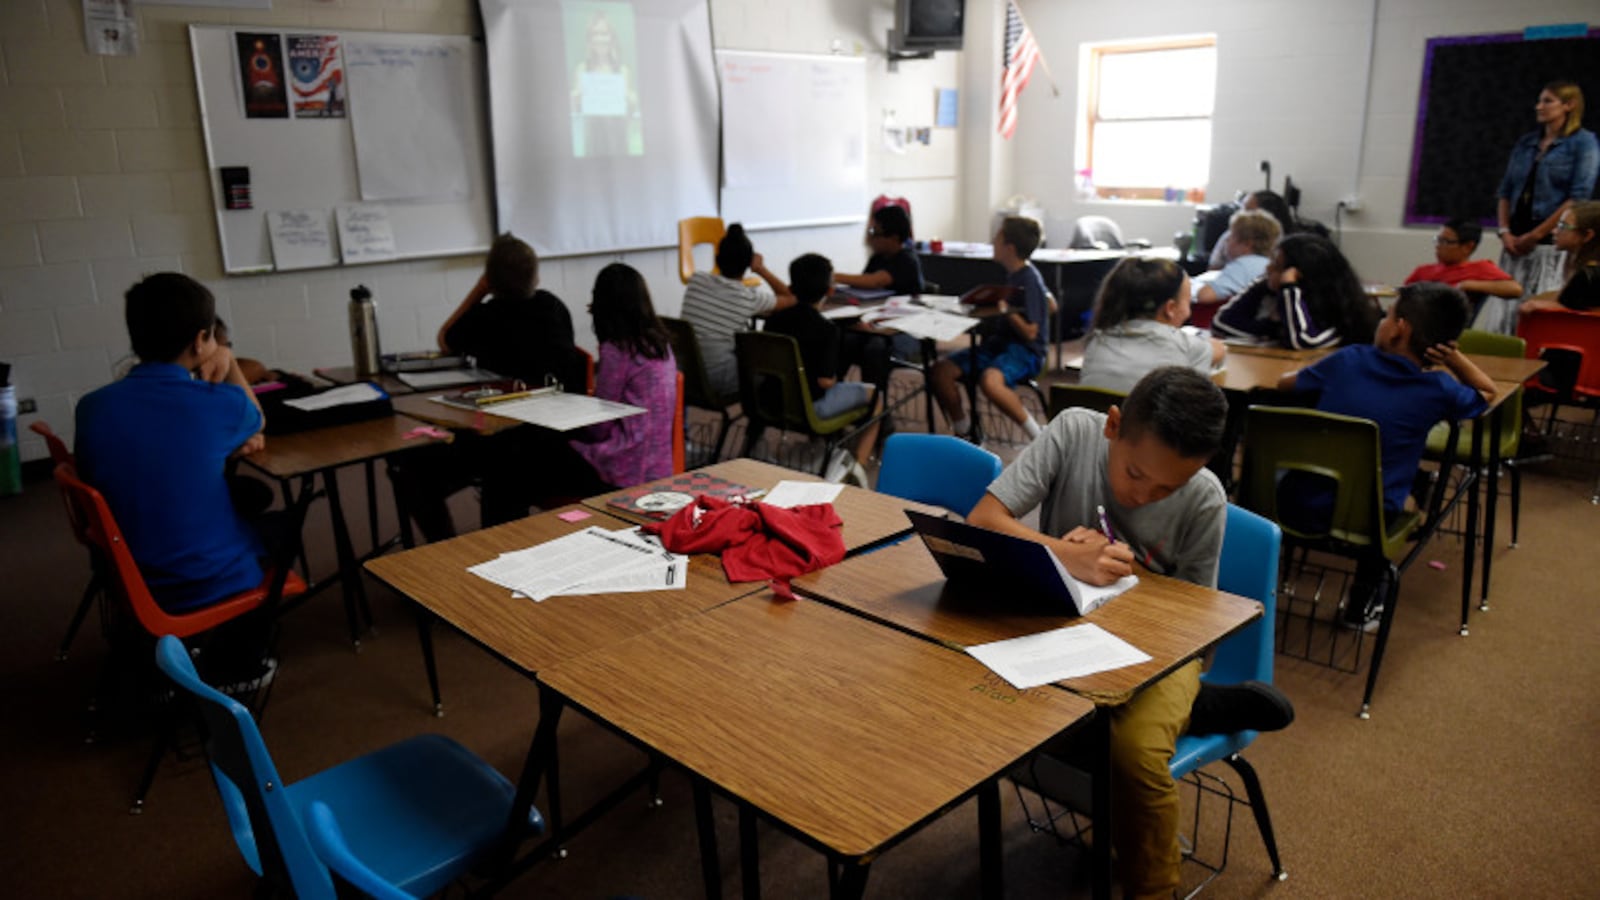 Students in Alicia Marquez's 6th grade science class at Overland Trail Middle School in Brighton watch a video and work on home work in August 2017. (Photo by Seth McConnell/The Denver Post)